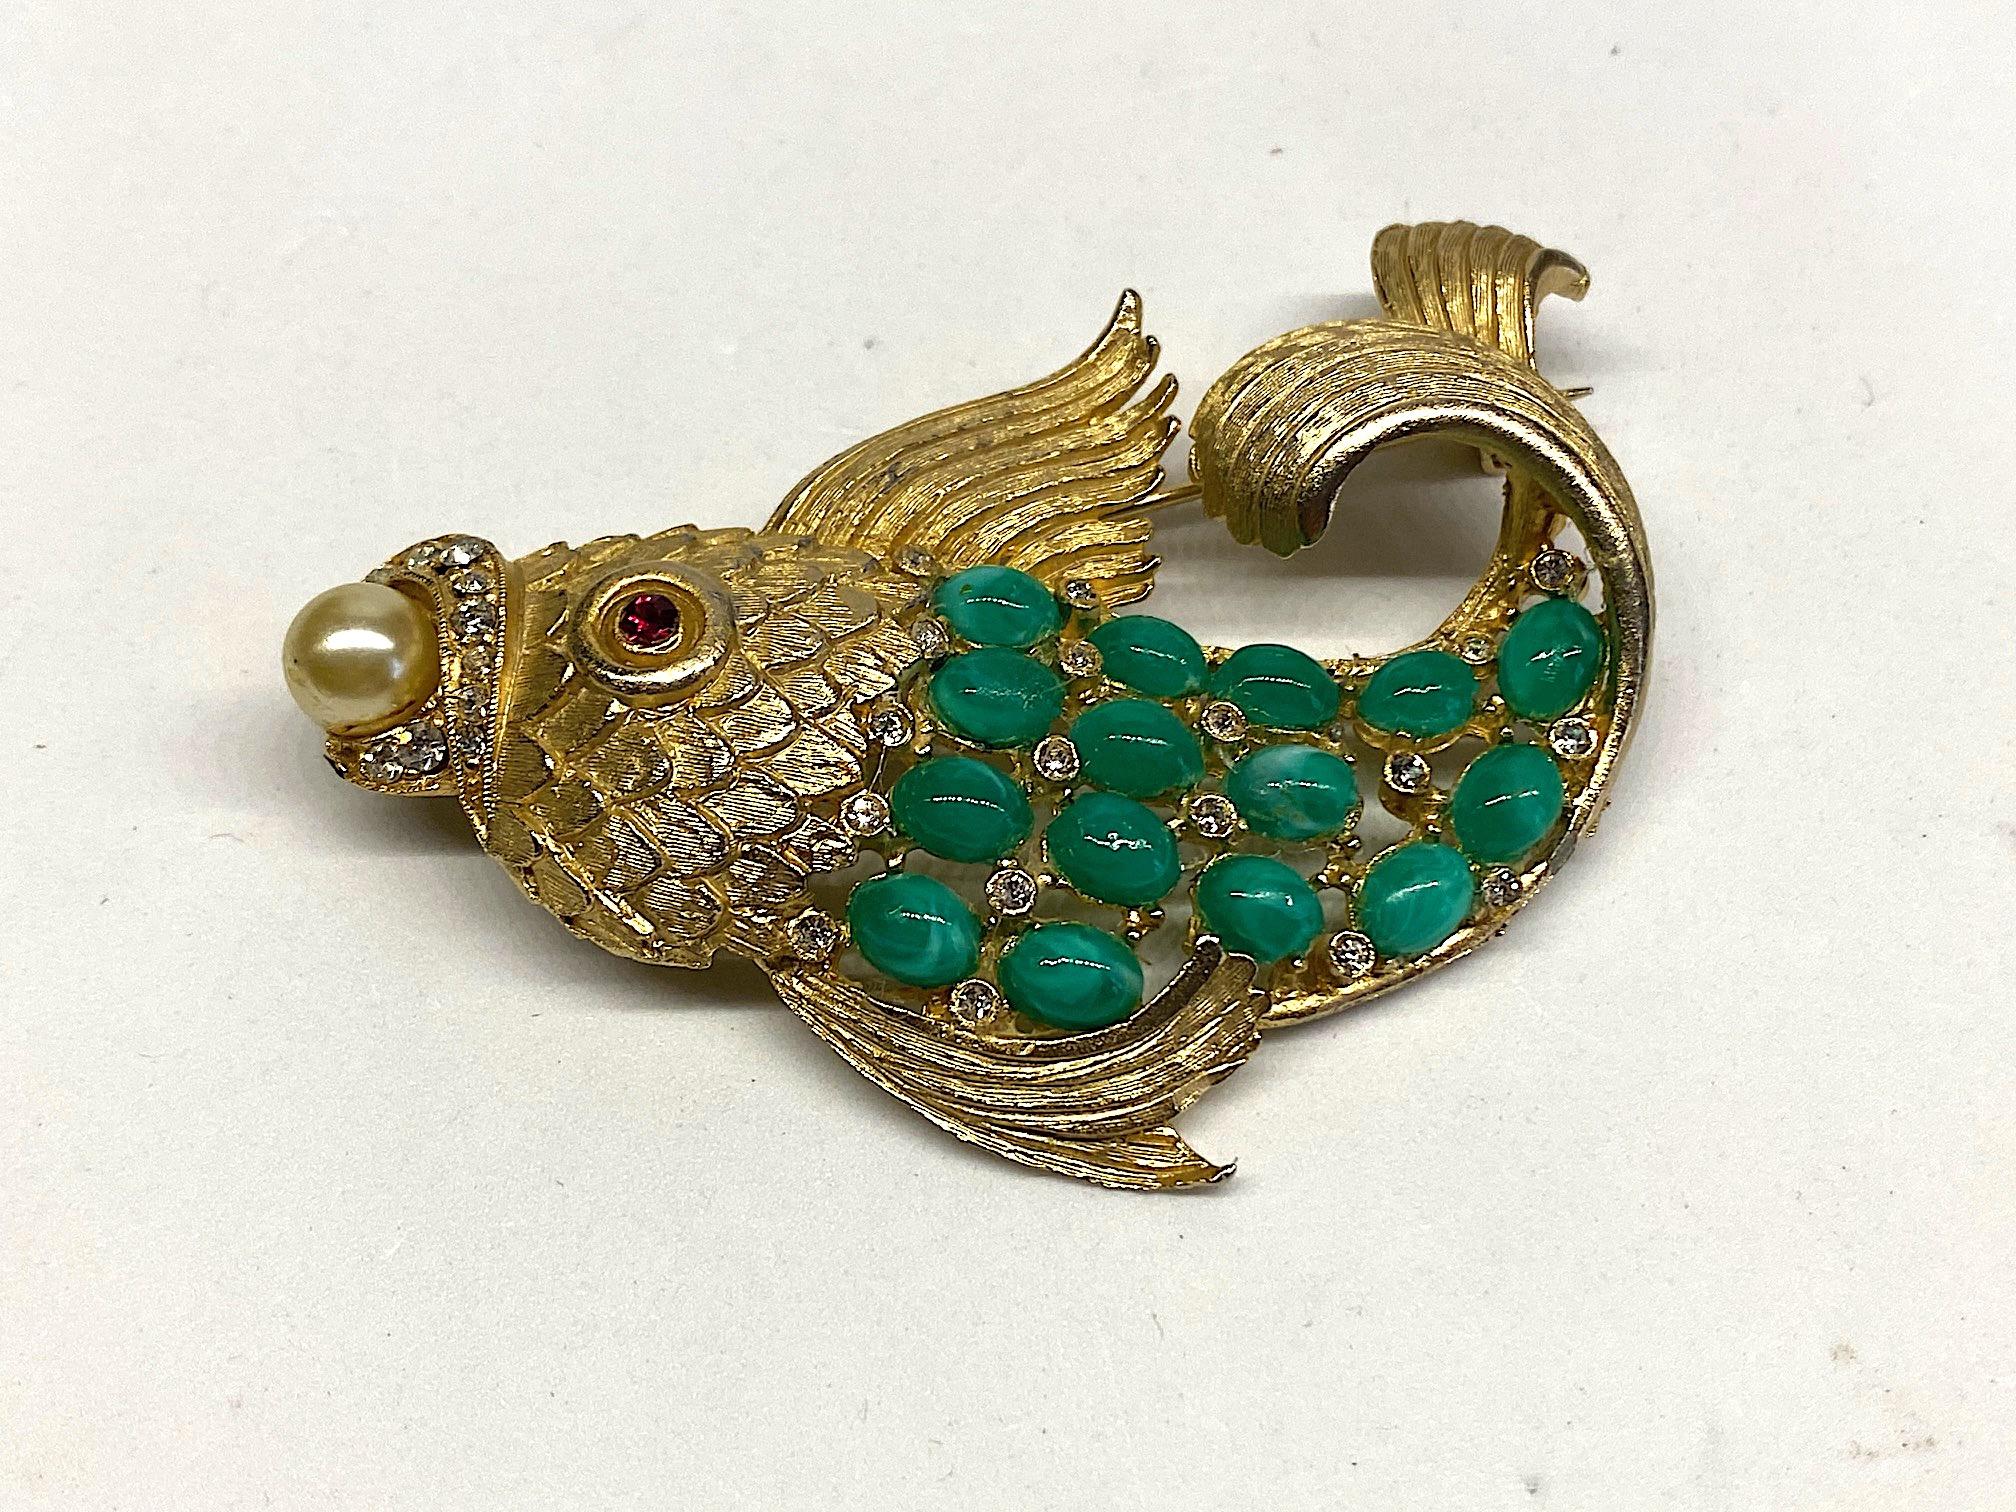 1950s Satin Gold Figural Brooch of Fish with Green Cabochon 2